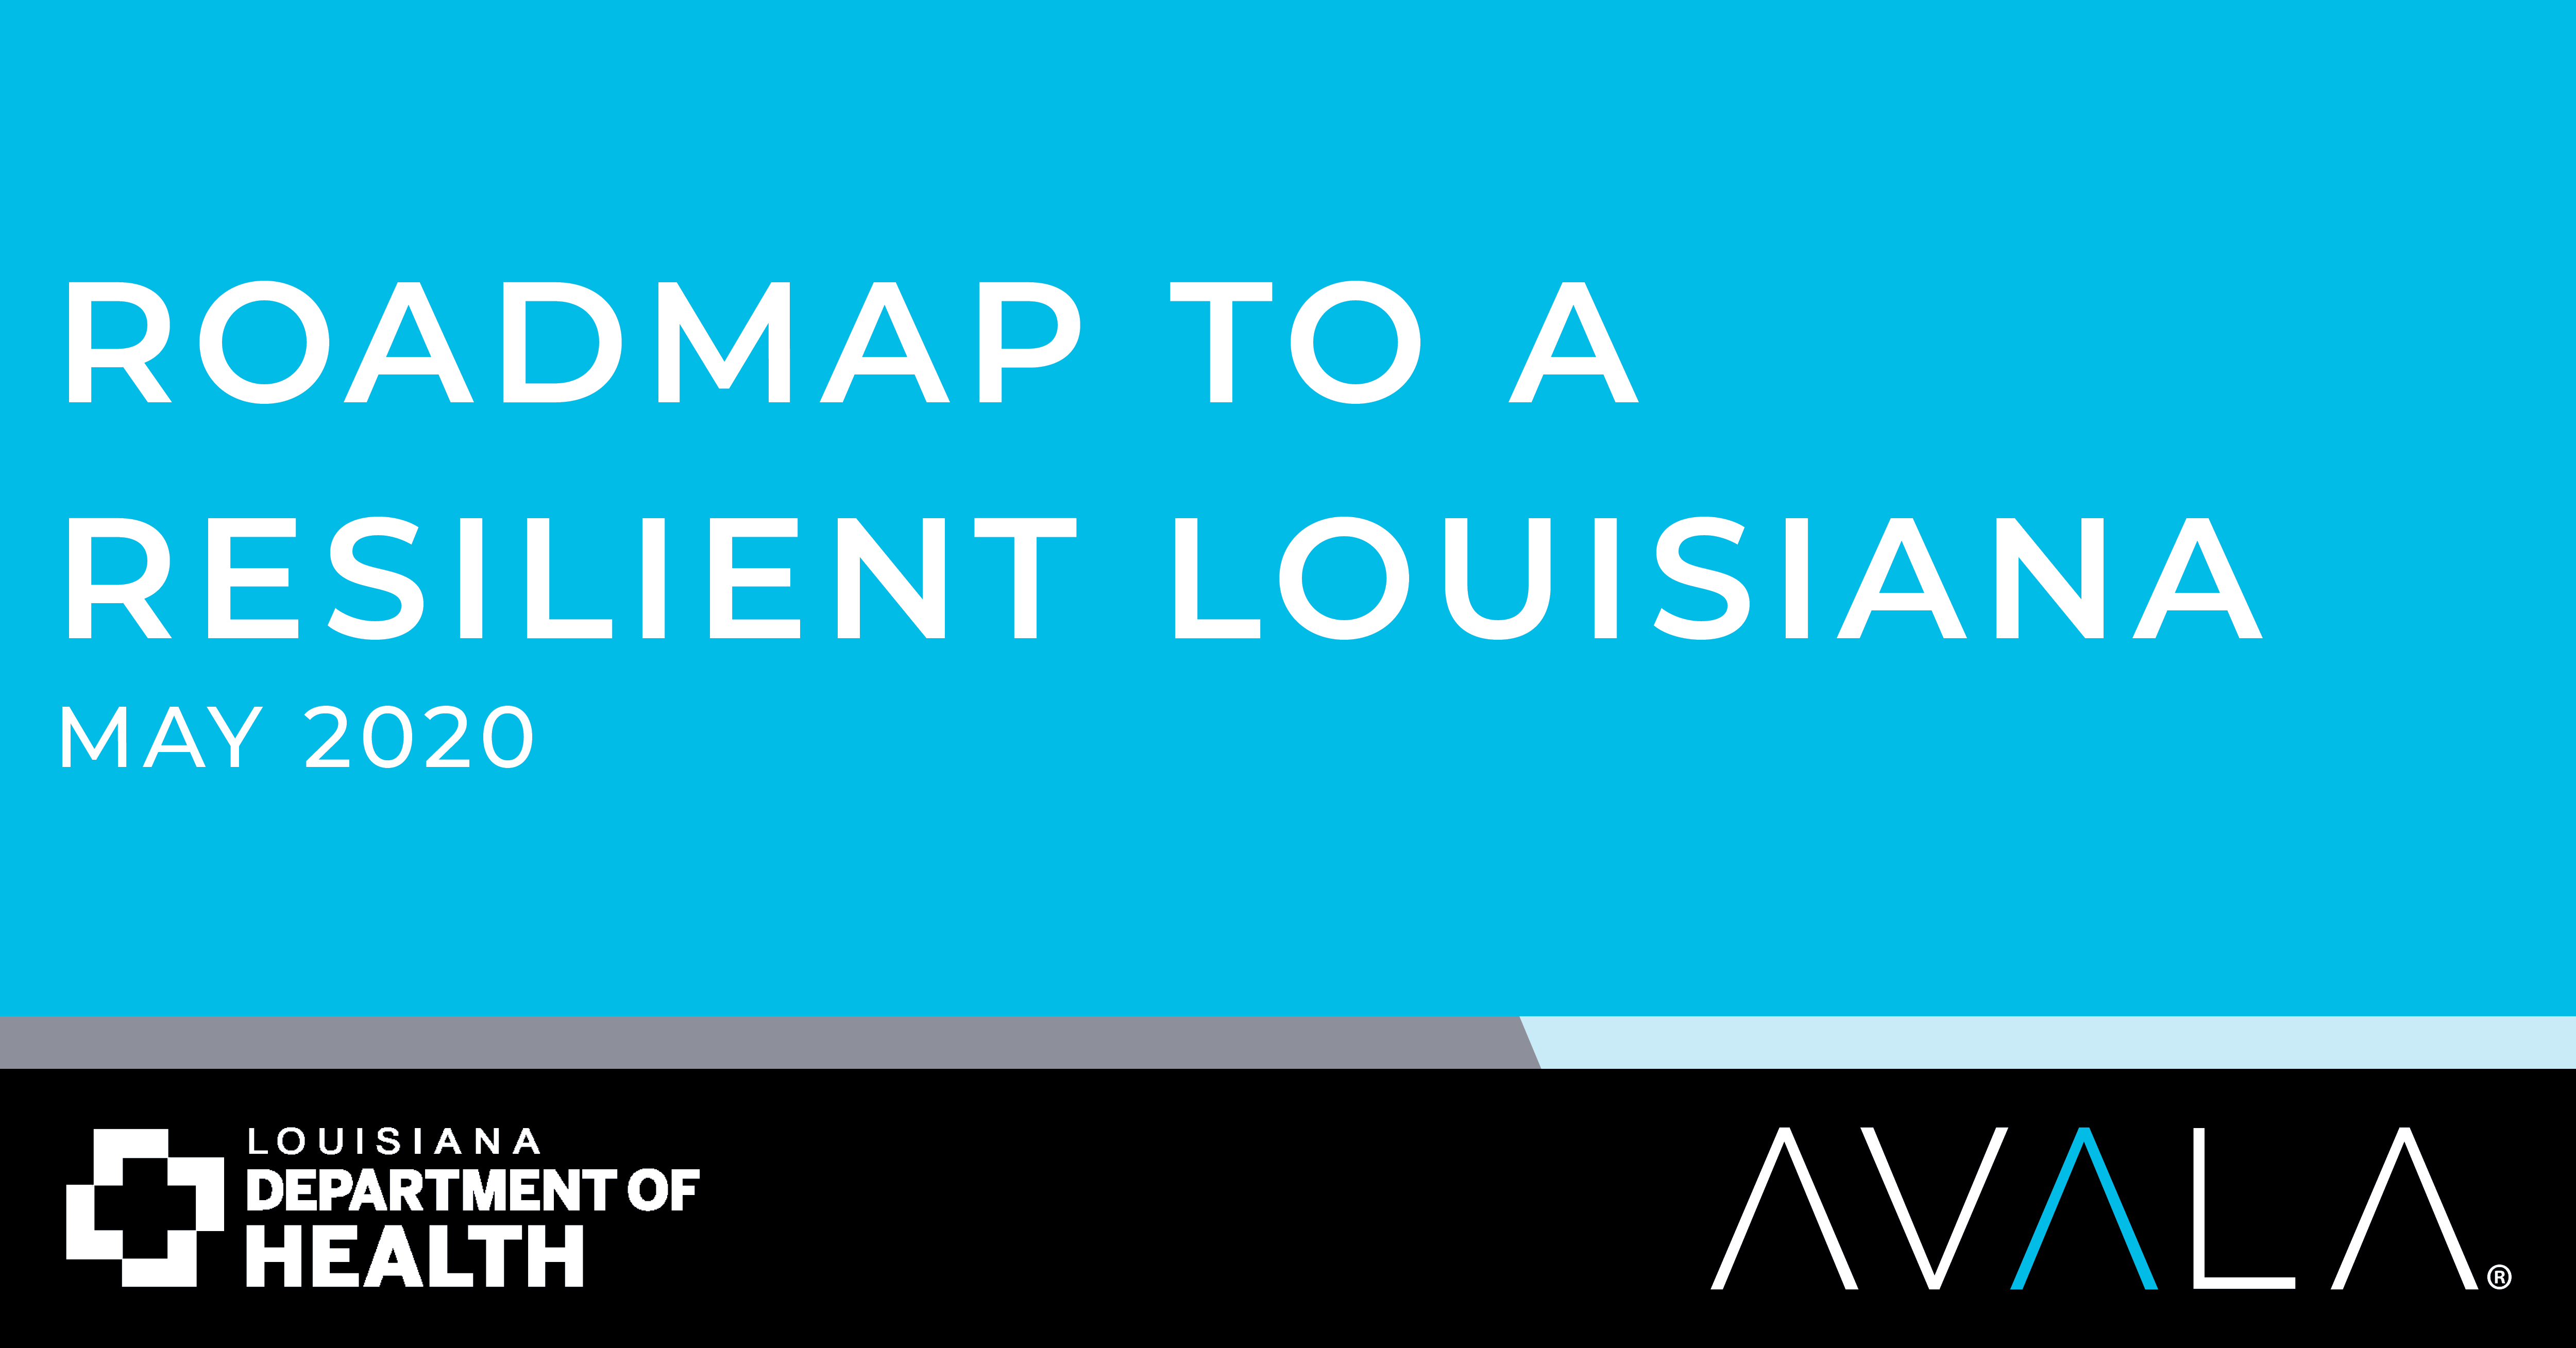 Roadmap to a Resilient Louisiana